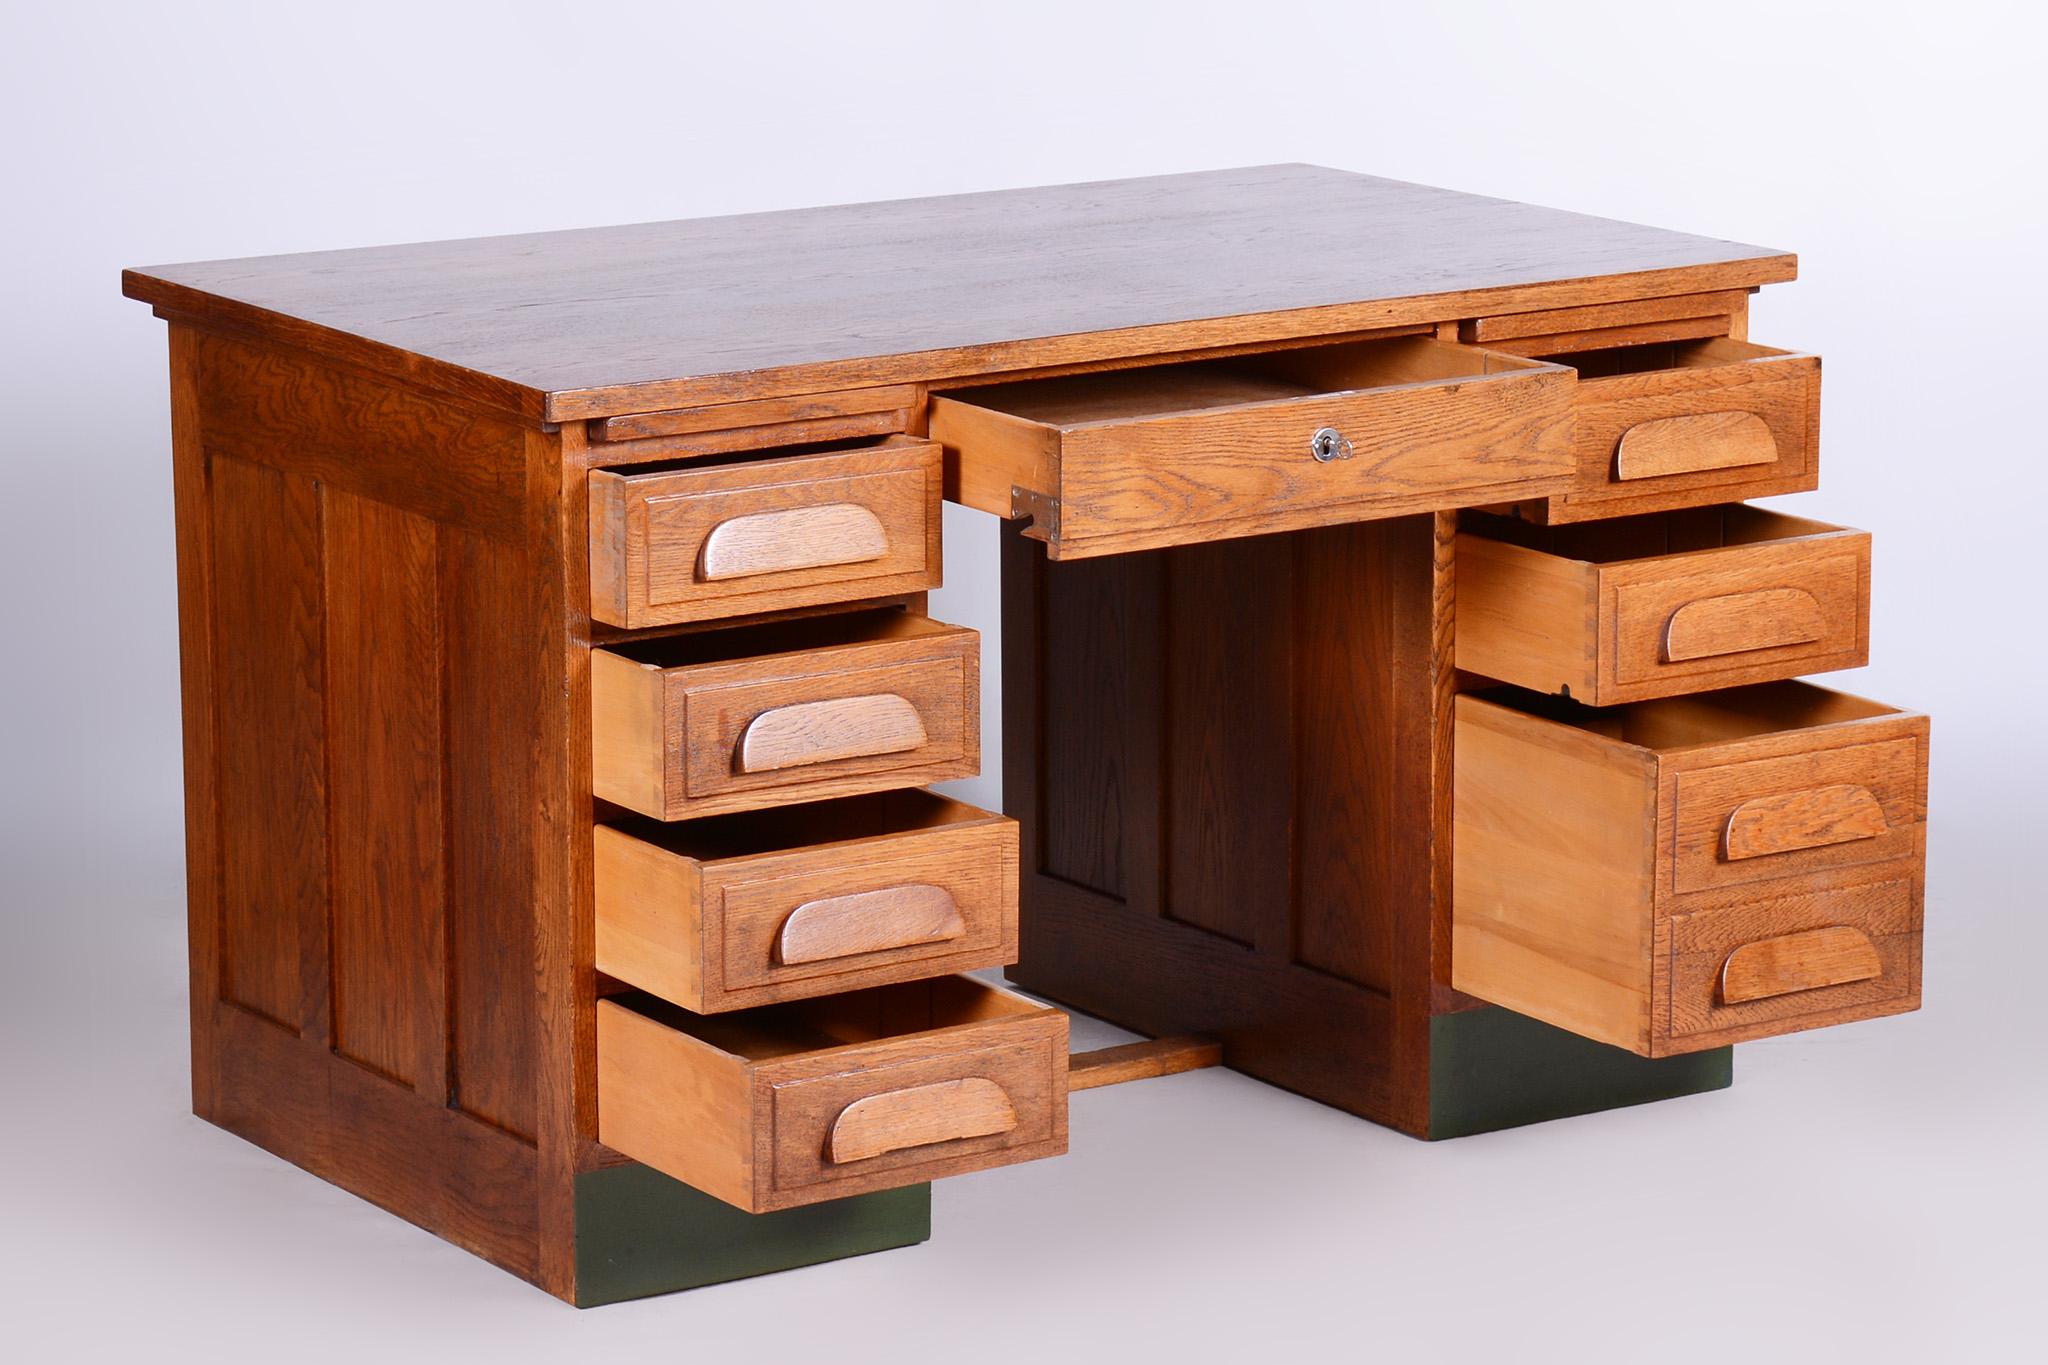 Restored Art Deco Solid Oak Writing Desk Made in the 1930s, Czechia In Good Condition For Sale In Horomerice, CZ